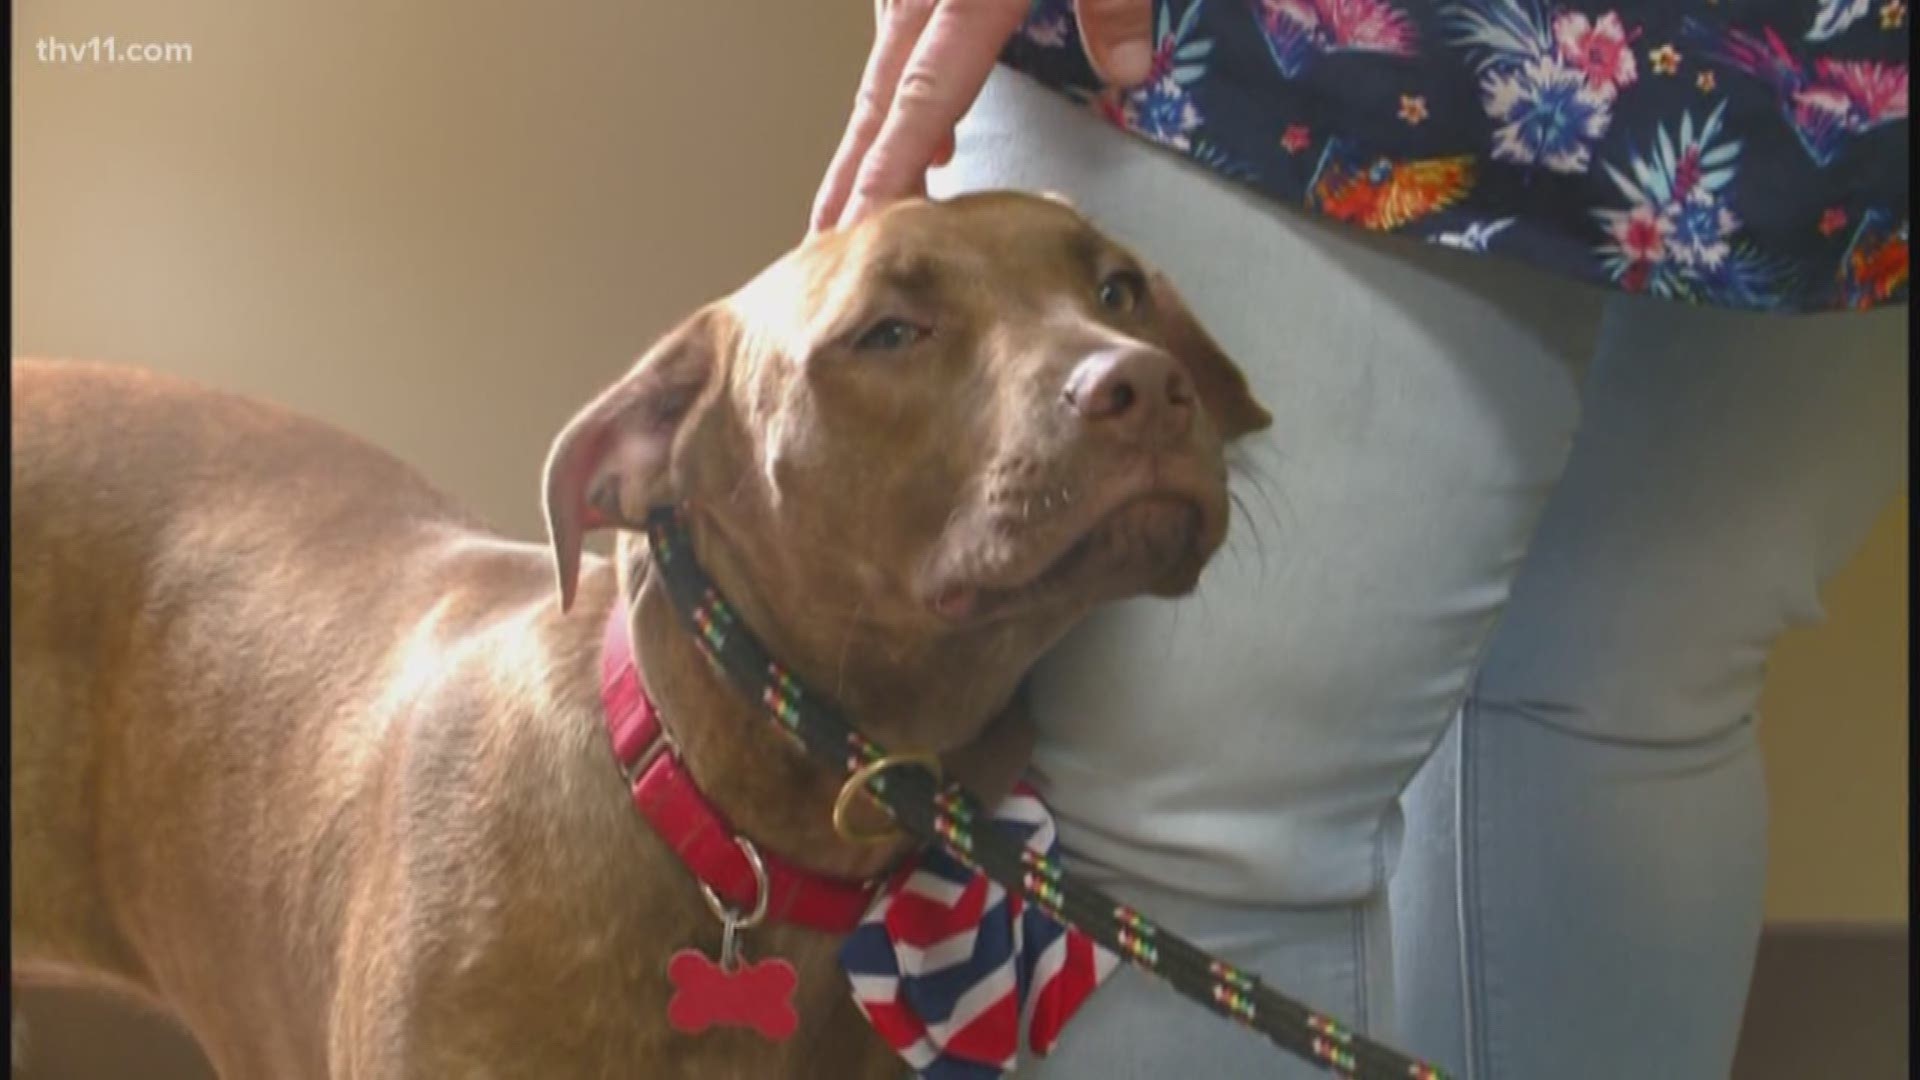 Rescue Road is a non-profit that redirects dogs from overcrowded shelters to safe, adoptive homes. This week, an extra special pup got the help he needed.